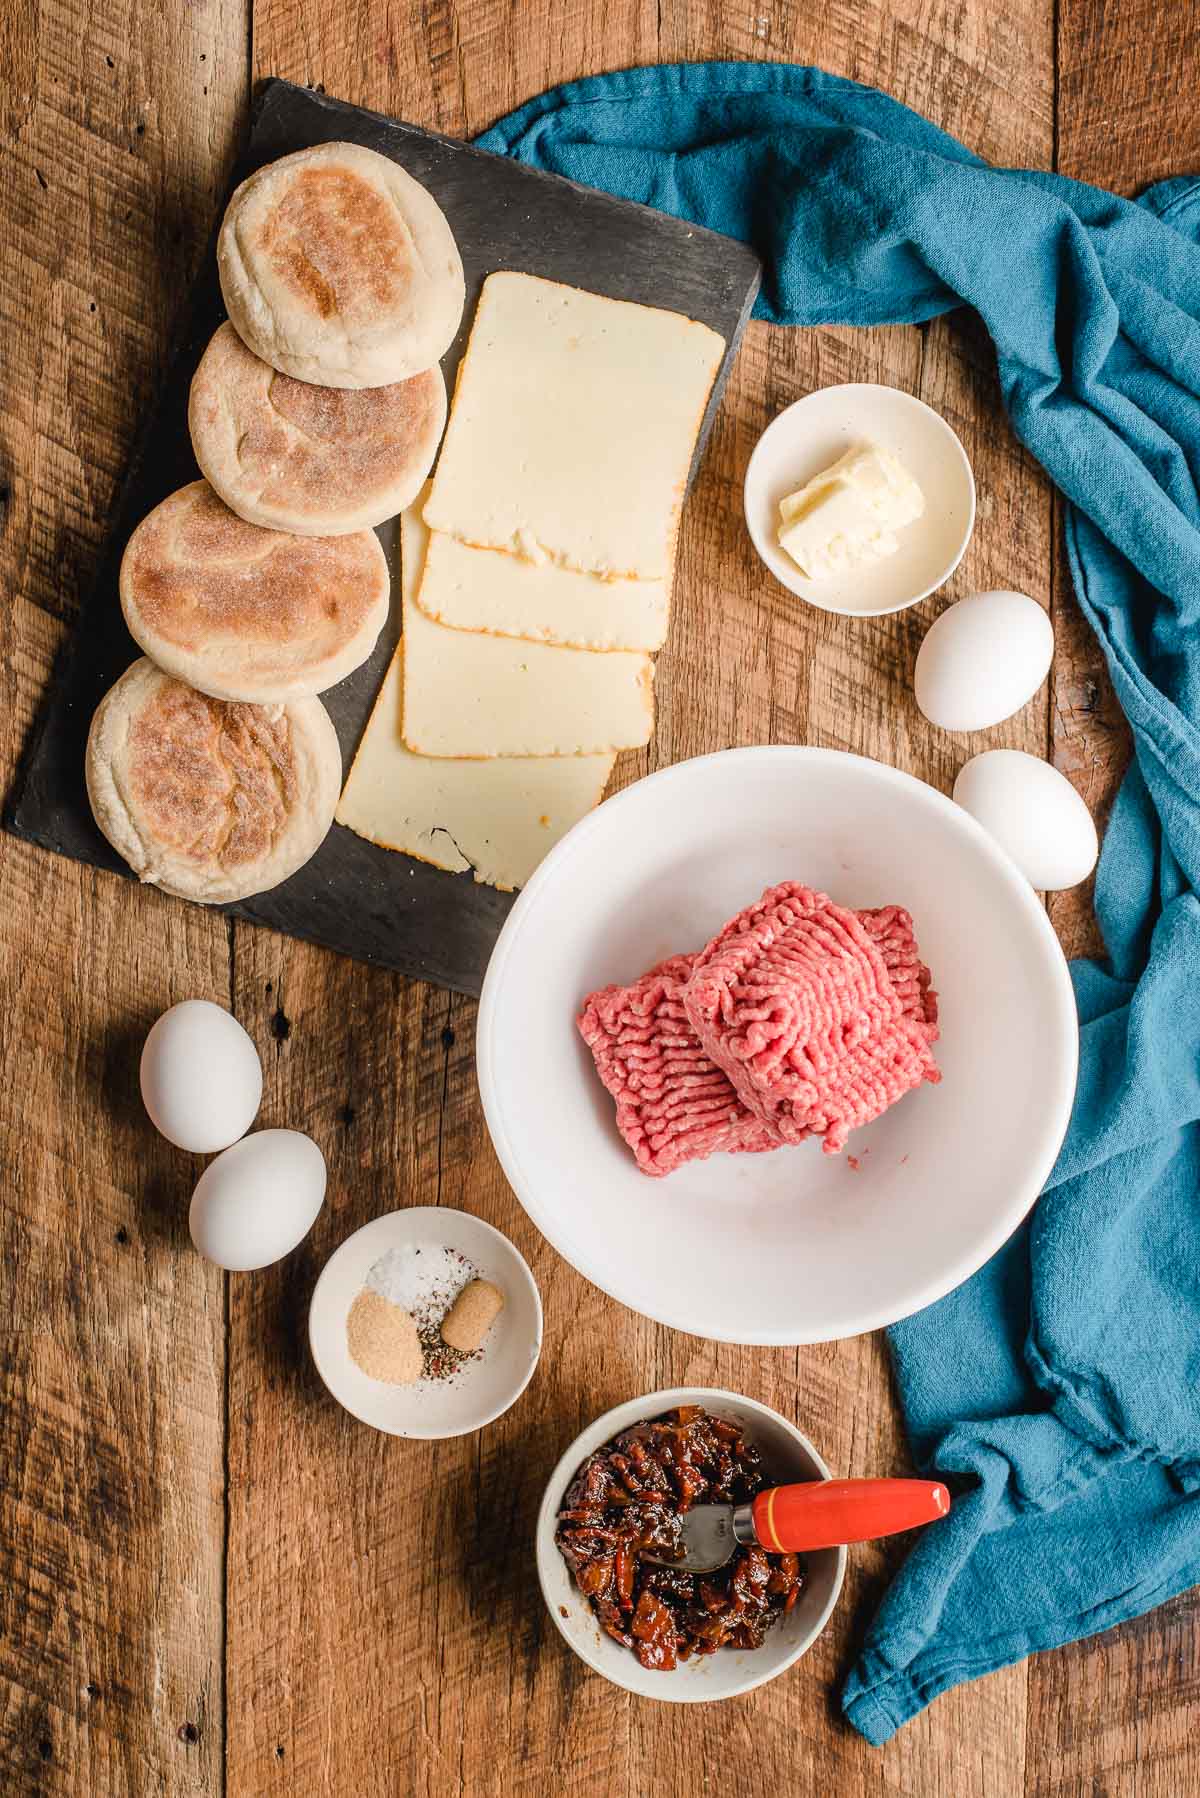 English muffins, cheese slices, ground beef, eggs, salary jam, and seasonings shown on a wood background.